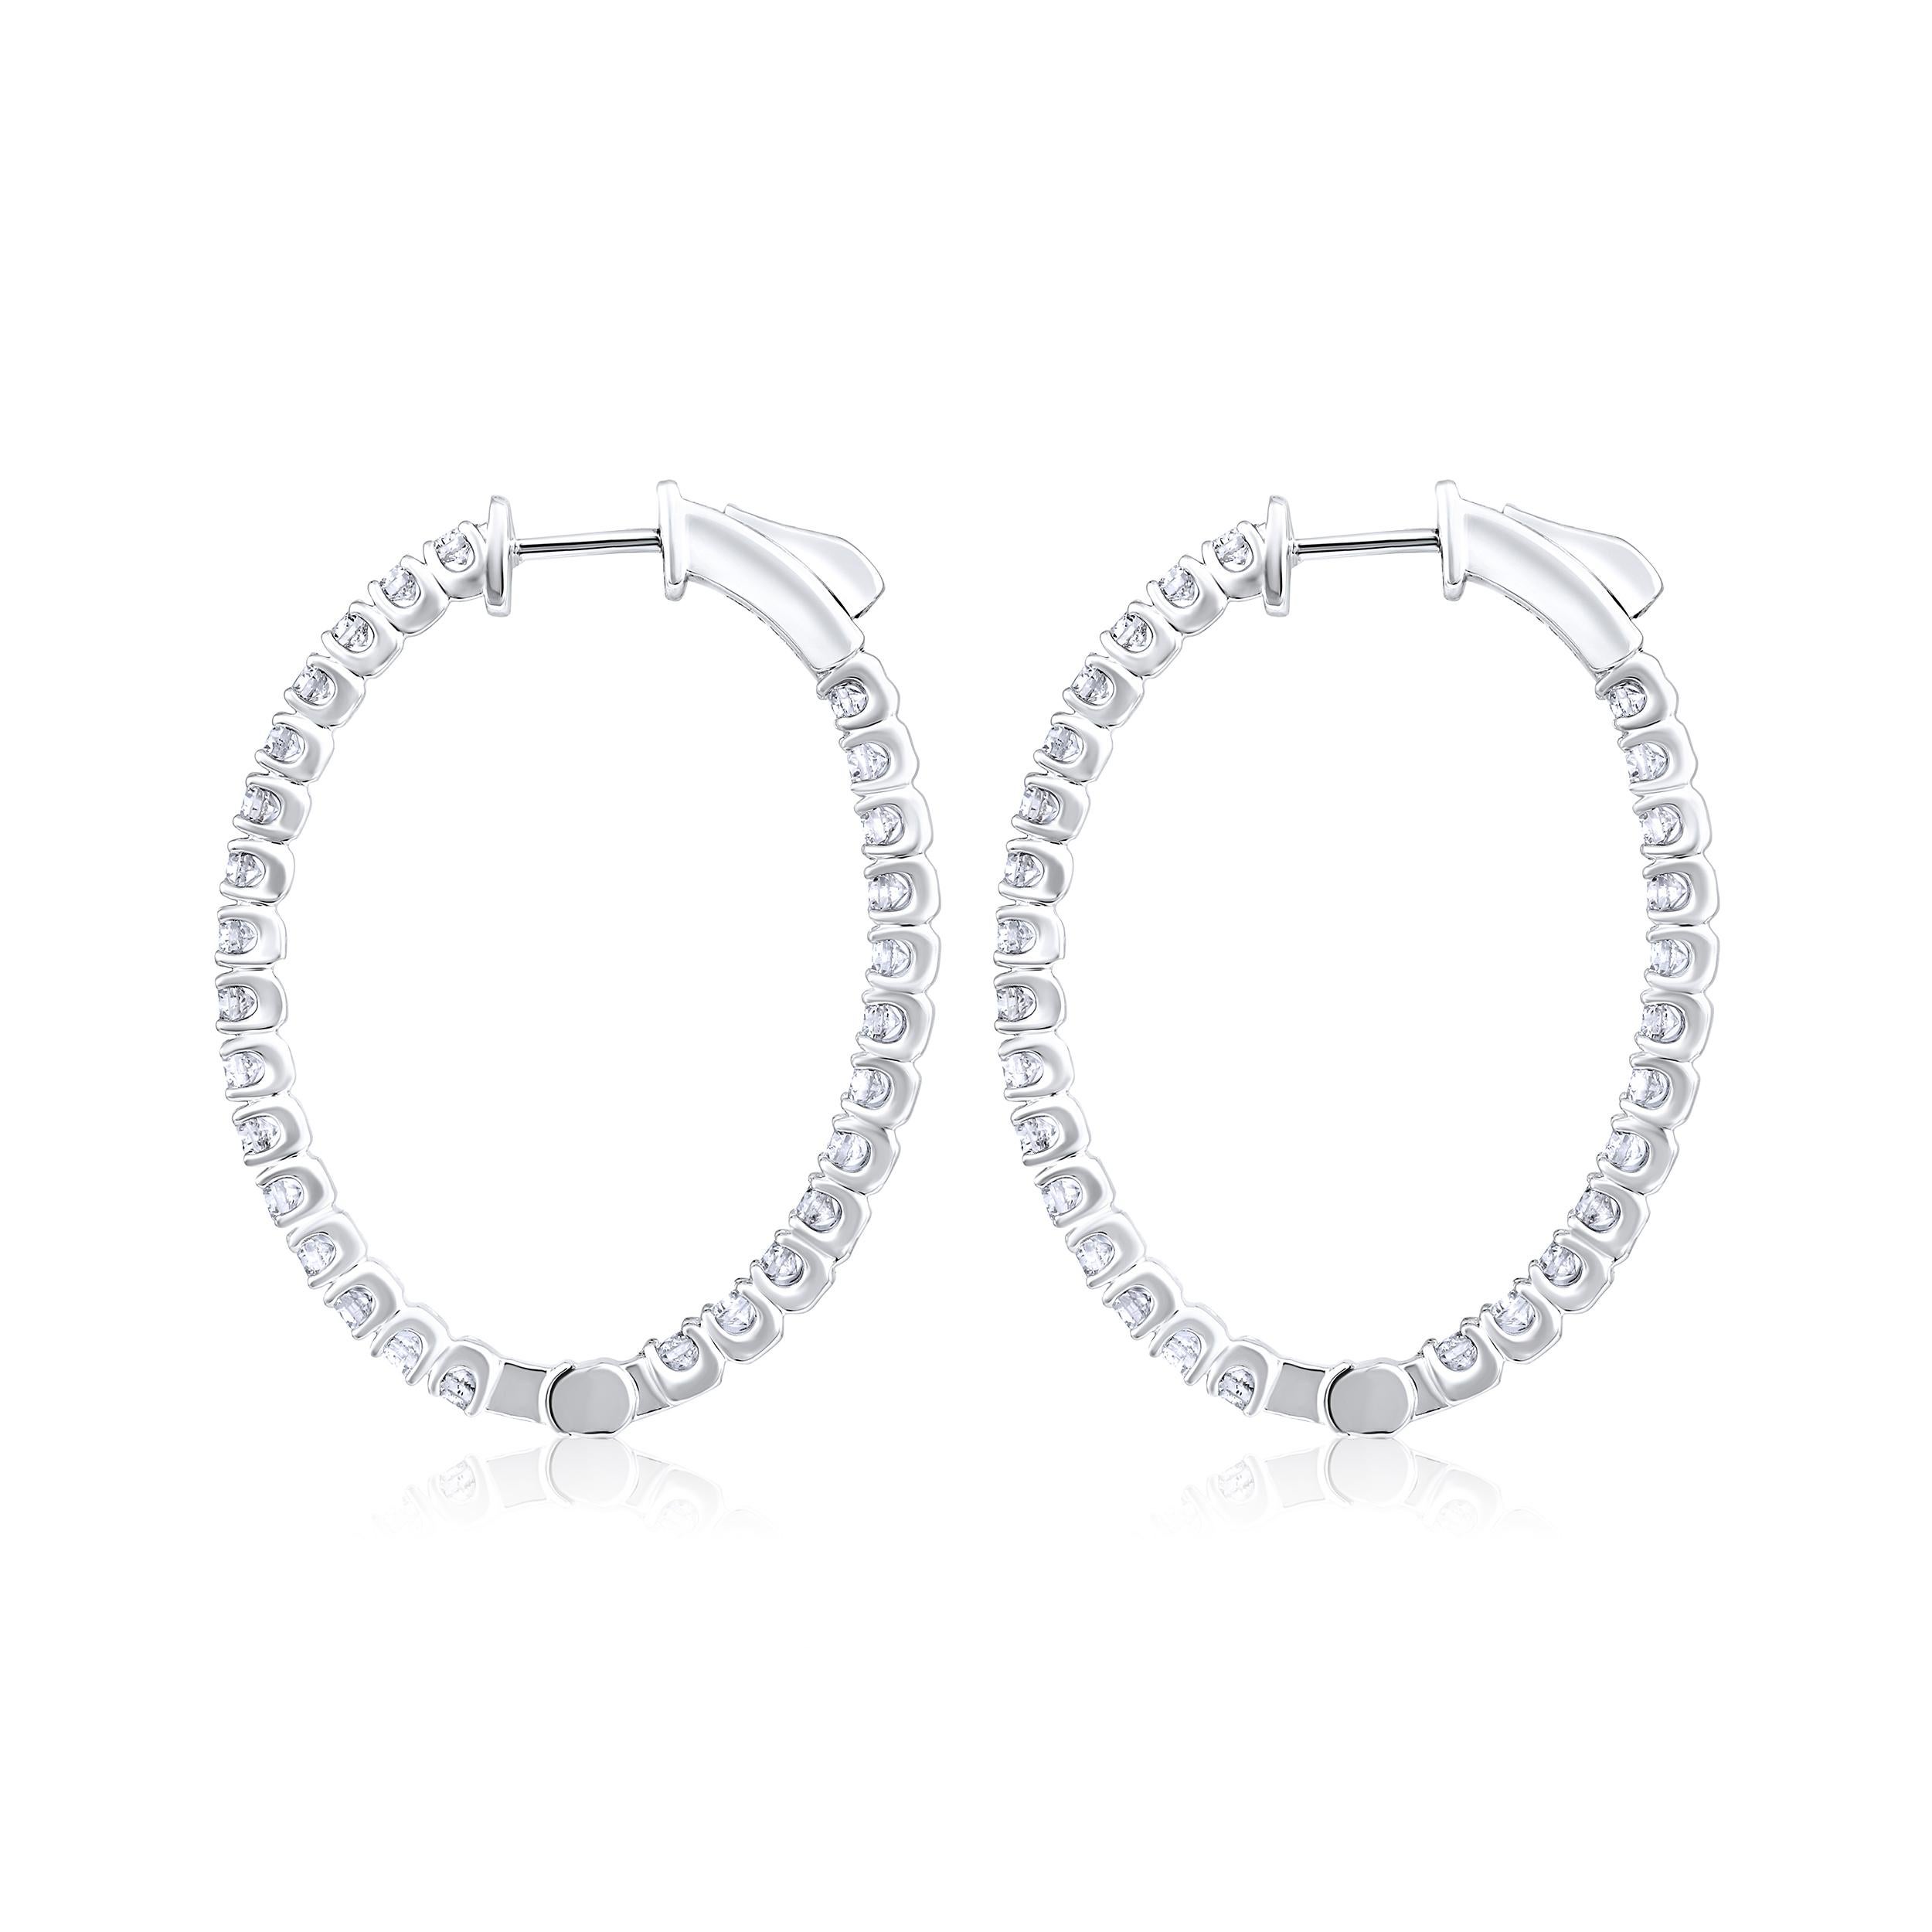 Brilliant Cut Certified 14k Gold 1.9 Carat Natural Diamond Oval Inside Out Hoop Earrings For Sale